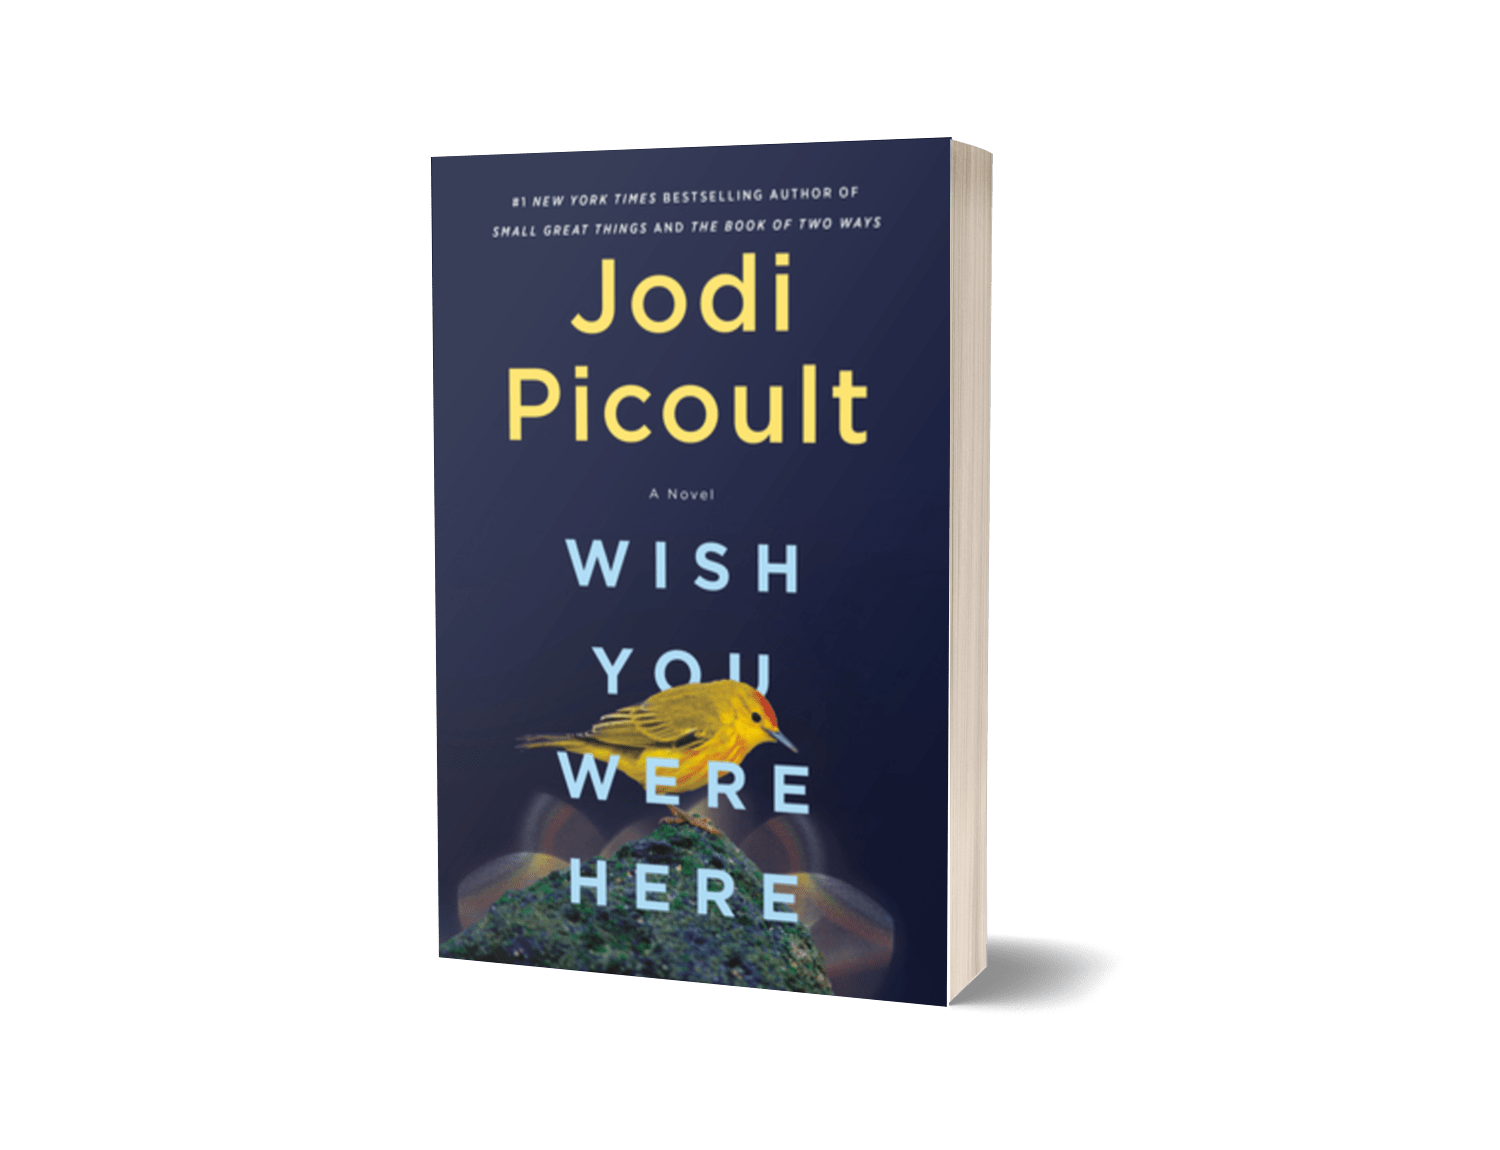 WISH YOU WERE HERE BY JODI PICOULT